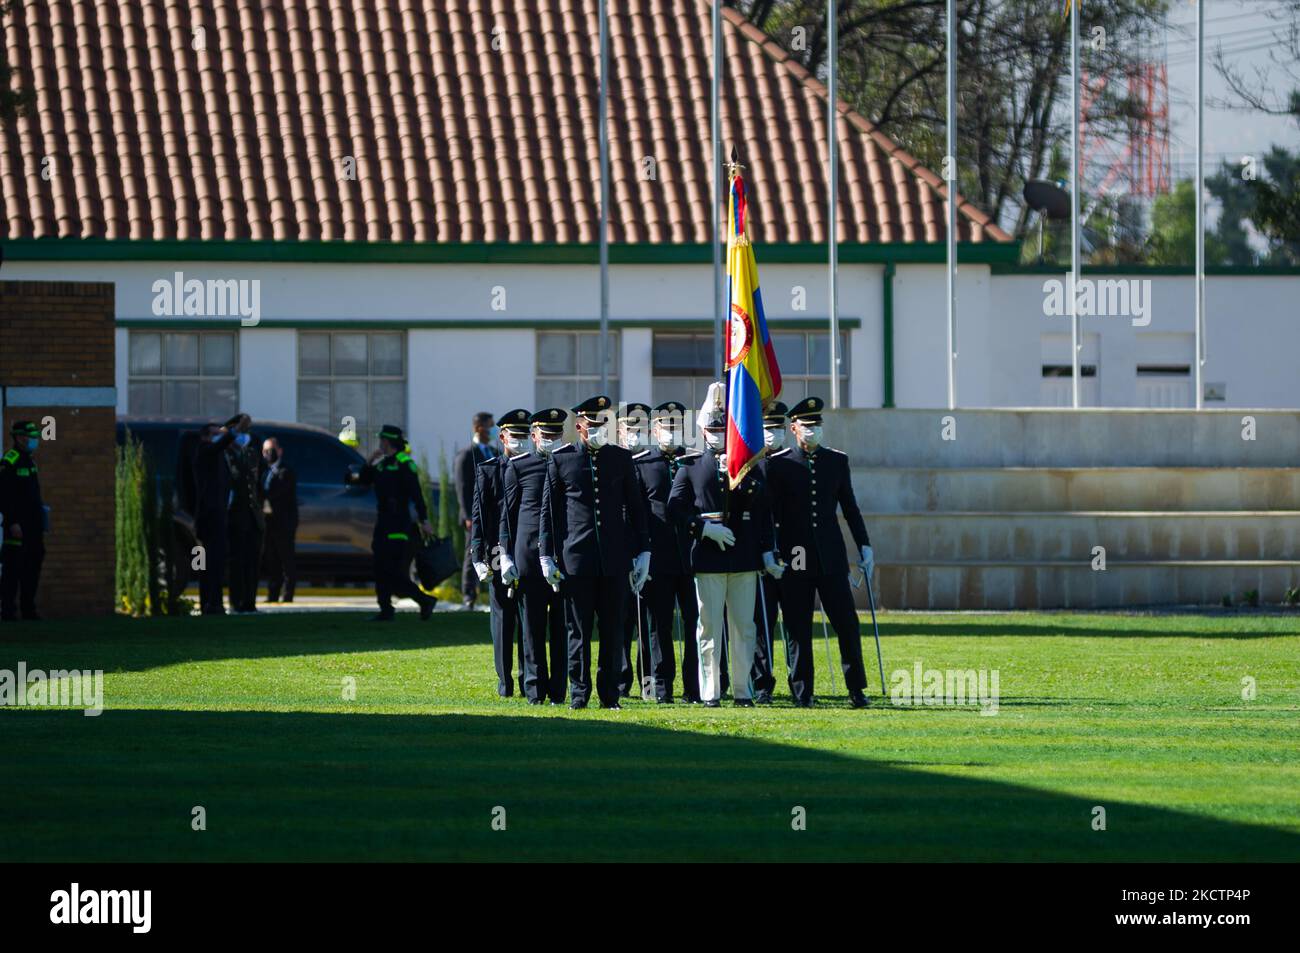 Newly promoted Police officers participate in their promotion ceremony during an event were Colombia's president Ivan Duque Marquez and Colombia's Minister of Defense Diego Molano in conmmemoration of the 130 anniversary of Colombia's National Police and the promotion to officers to more than a 100 police members, in Bogota, Colombia on November 11, 2021. (Photo by Sebastian Barros/NurPhoto) Stock Photo